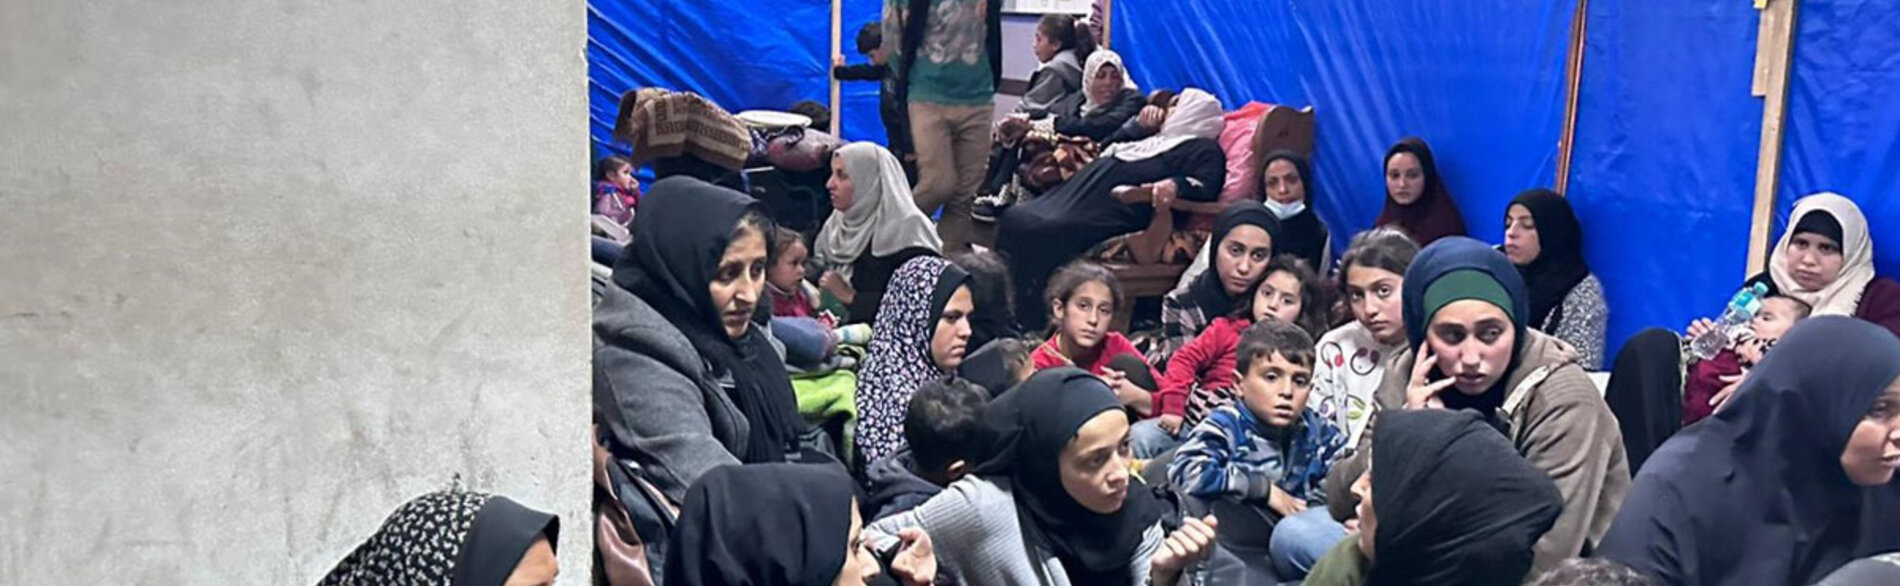 Women and children squeezing into a limited space at an overcrowded UNRWA facility in Khan Younis, amid nearby gunfire and shelling. Photo by UNRWA/Hussein Owda, 23 January 2024 